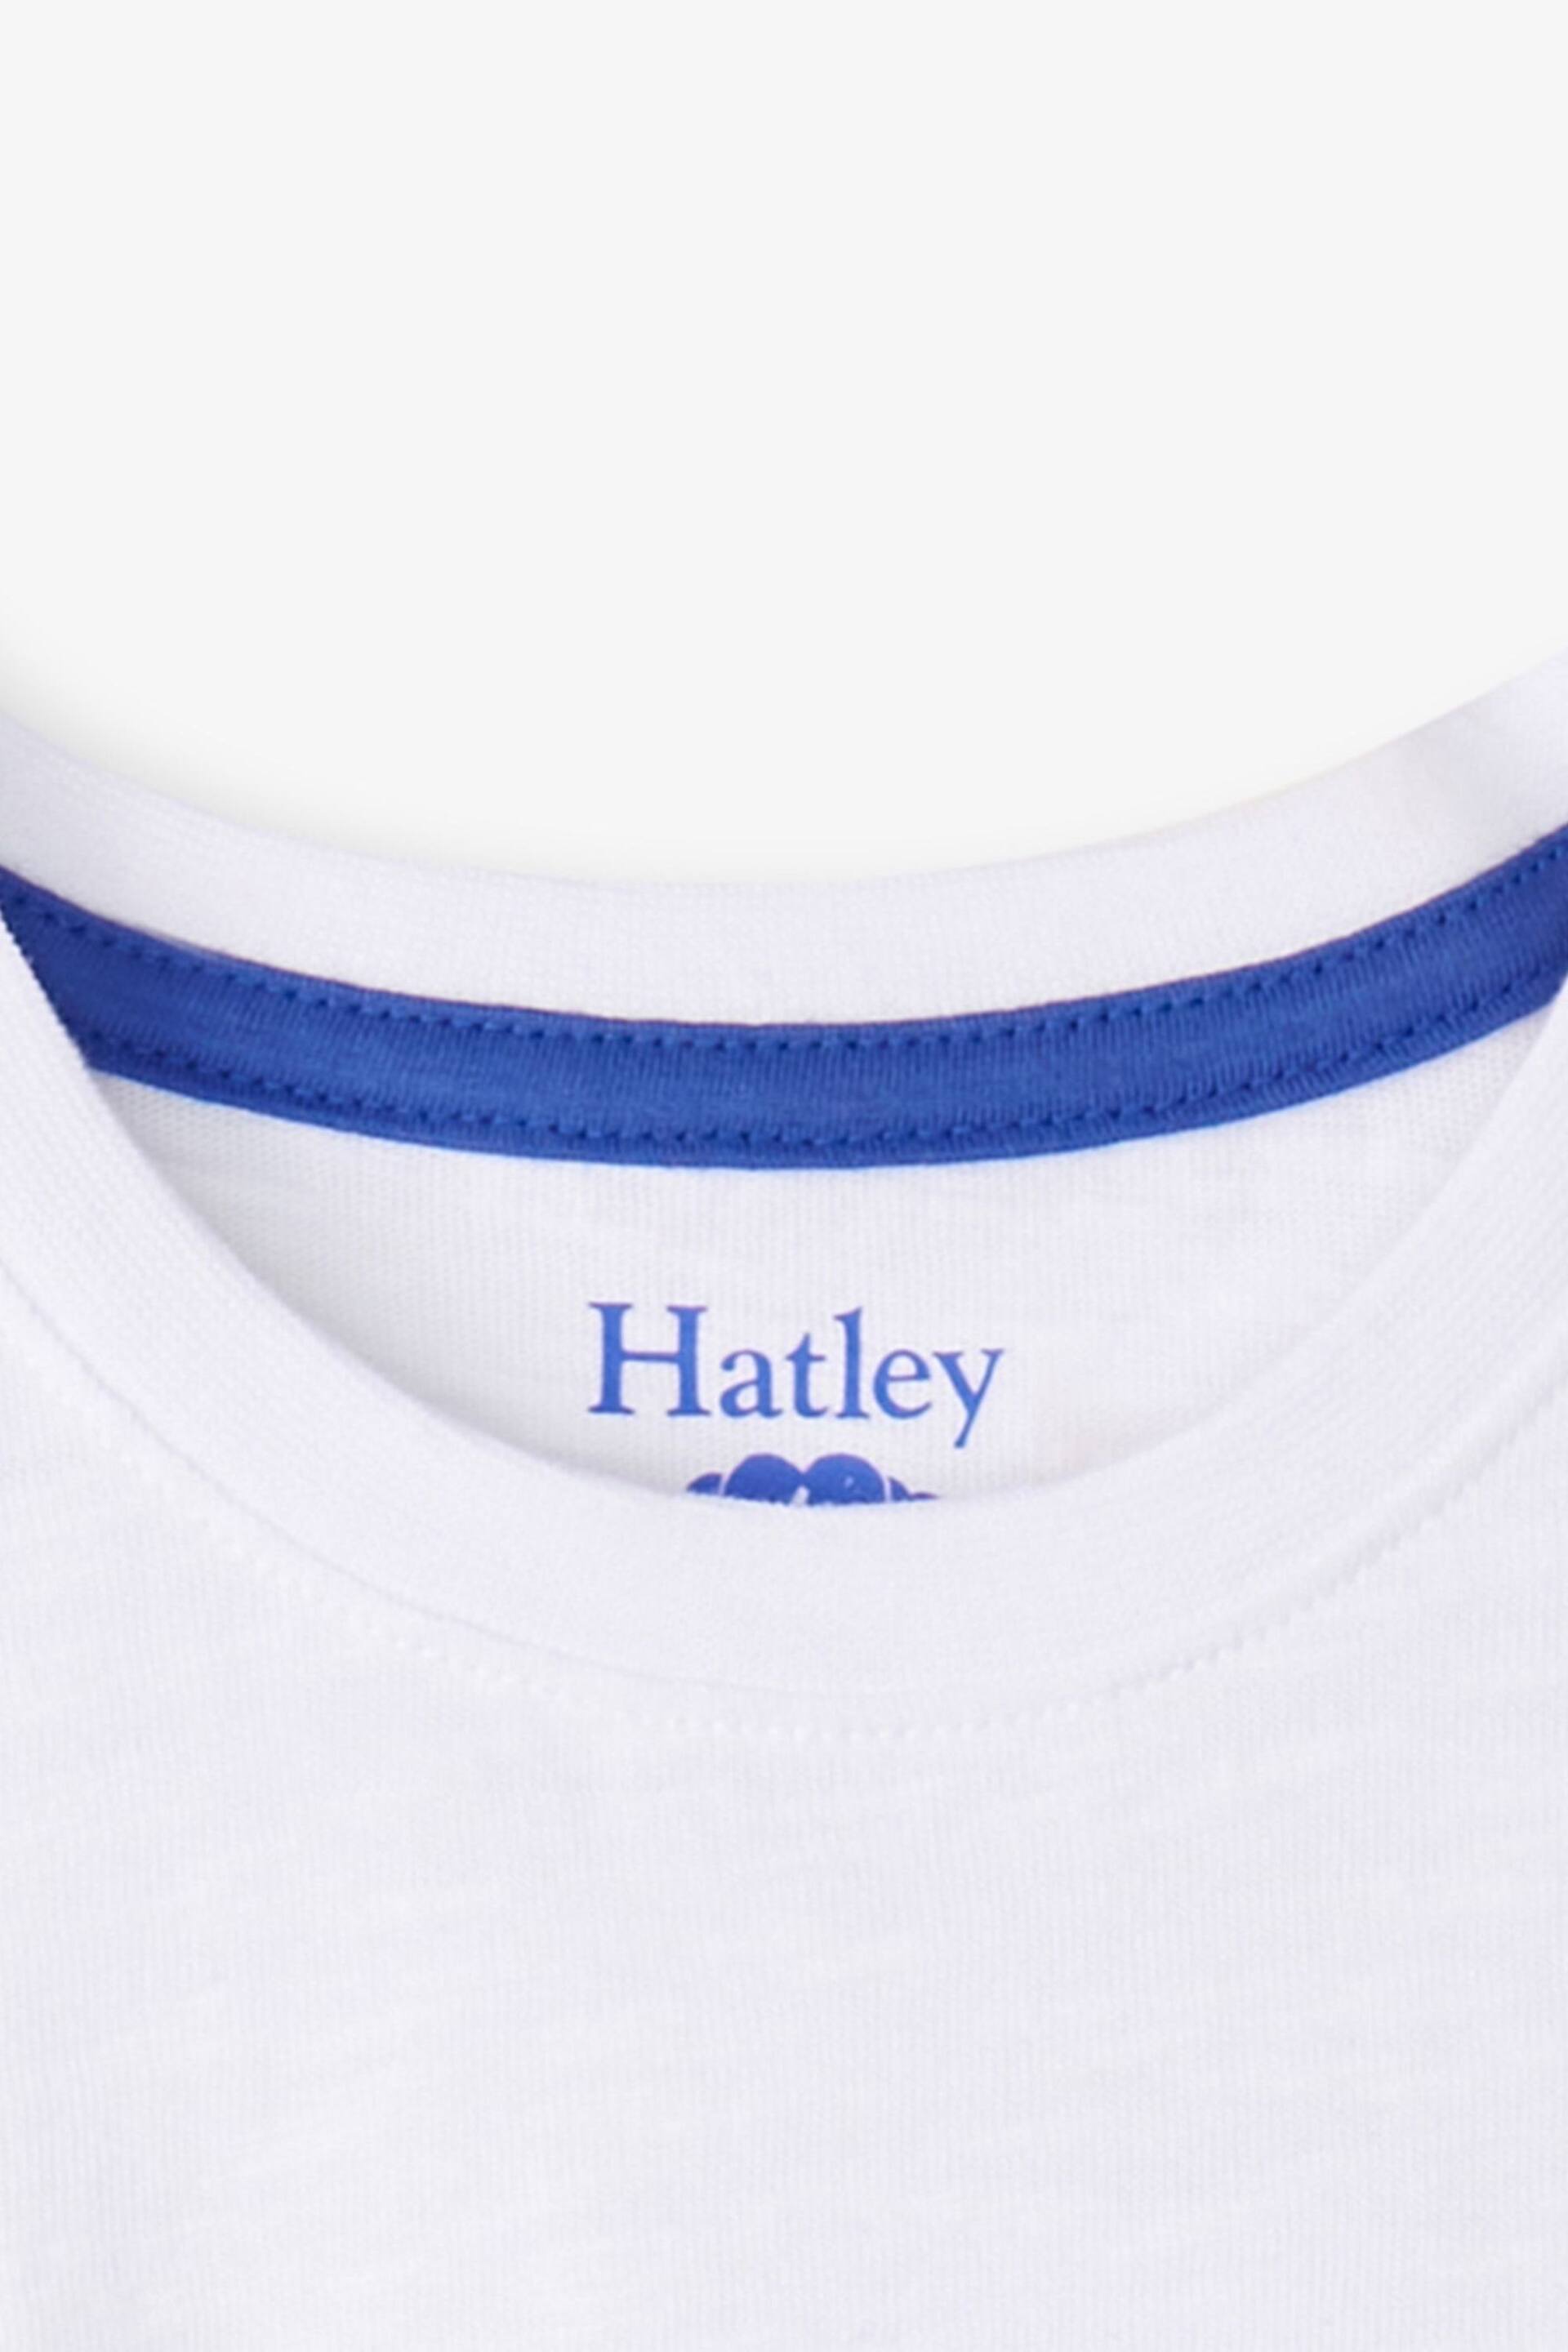 Hatley Embroidered Detail Graphic T-Shirt - Image 3 of 5